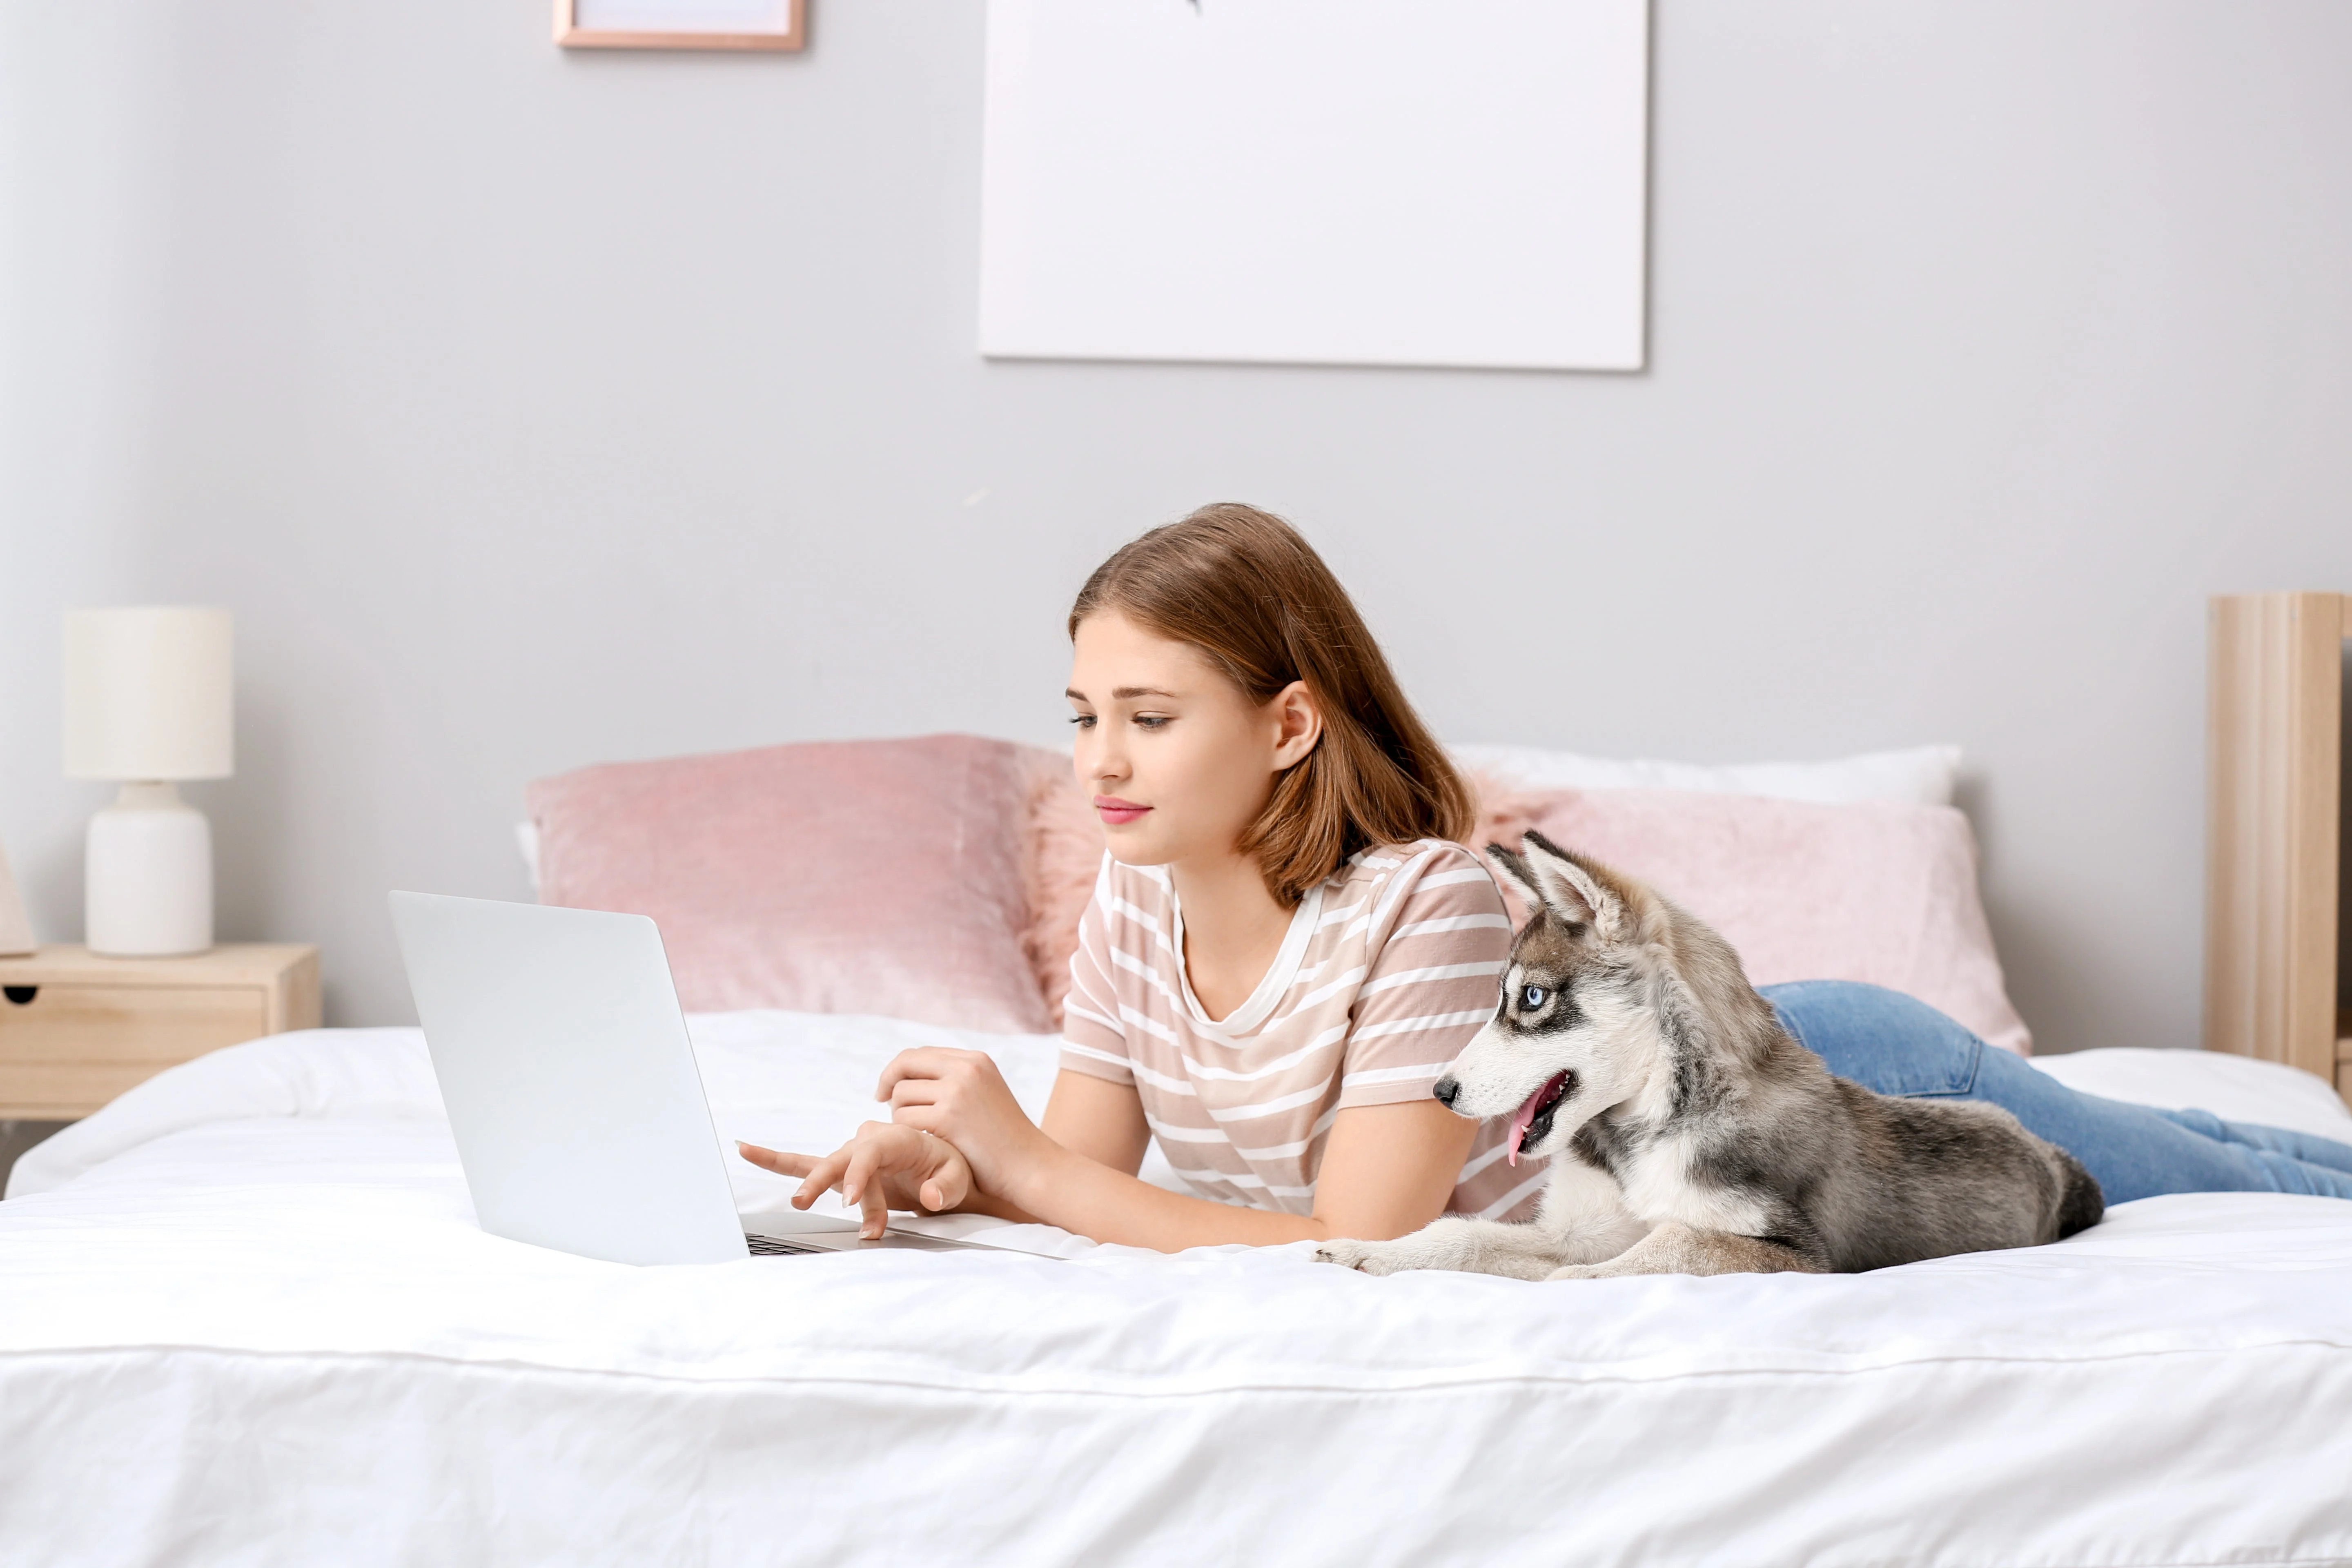 Girl lying on the bed using a laptop